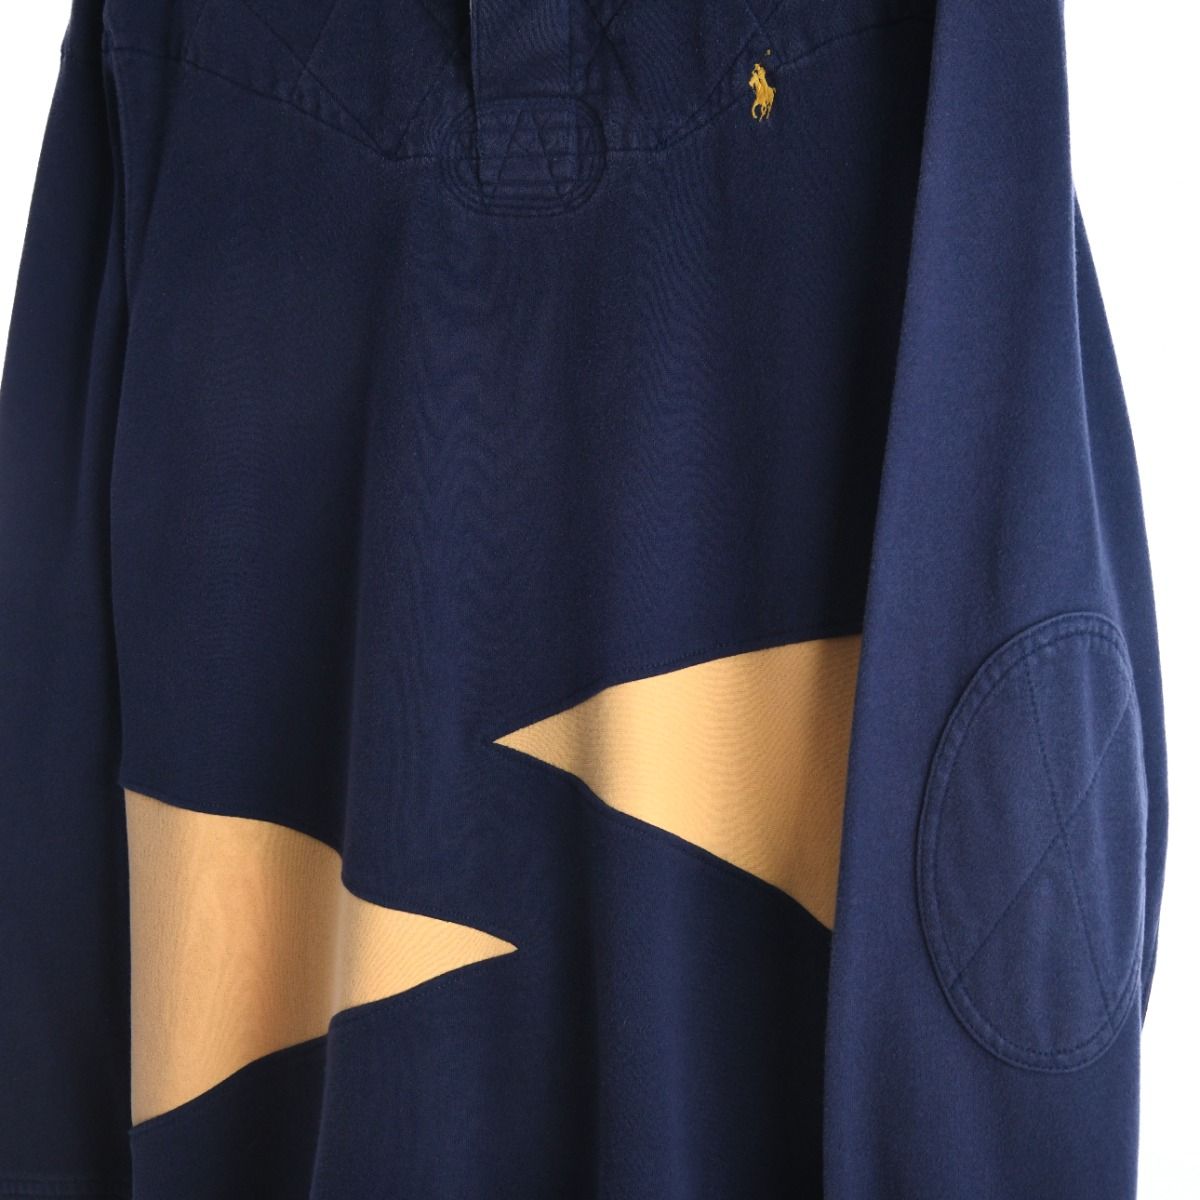 Polo Ralph Lauren REWORKED Rugby Shirt